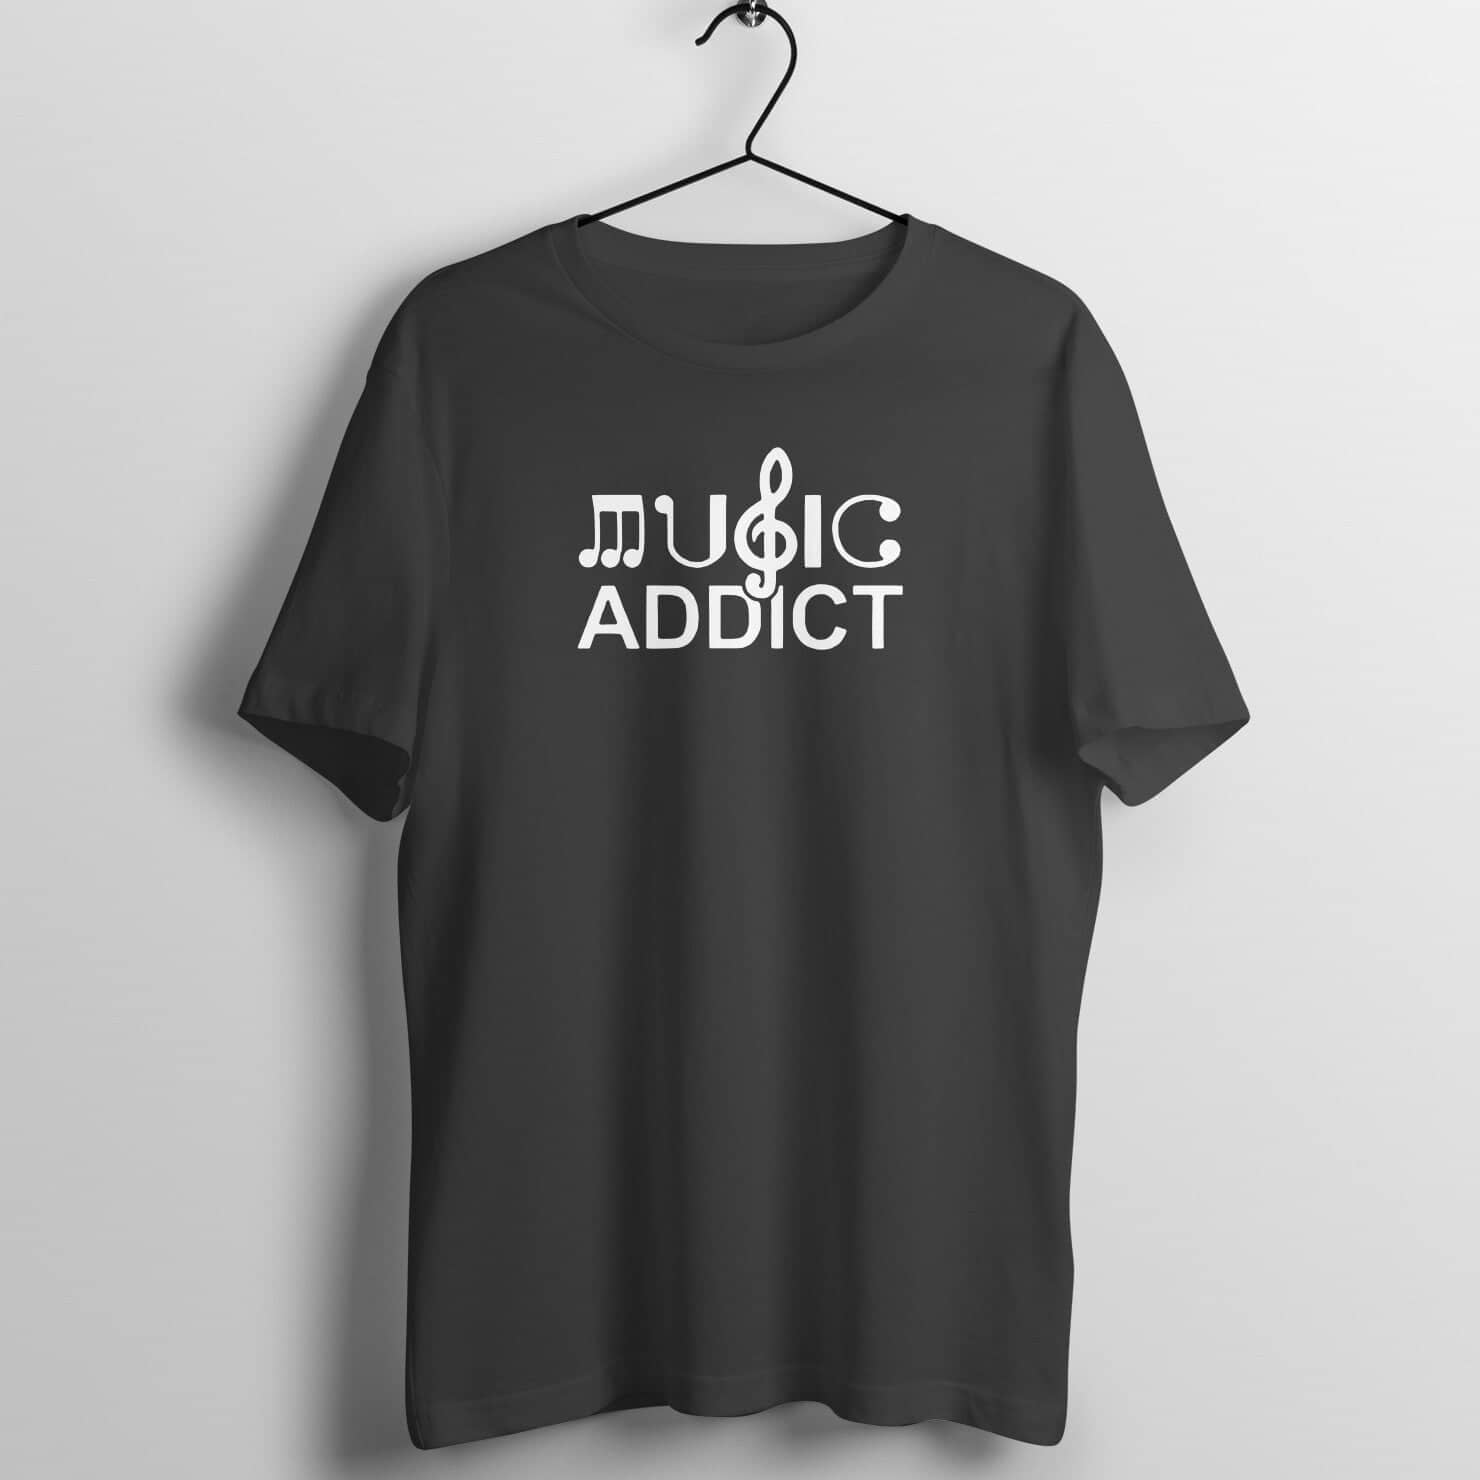 Music Addict Exclusive Black T Shirt for Music Loving Men and Women freeshipping - Catch My Drift India